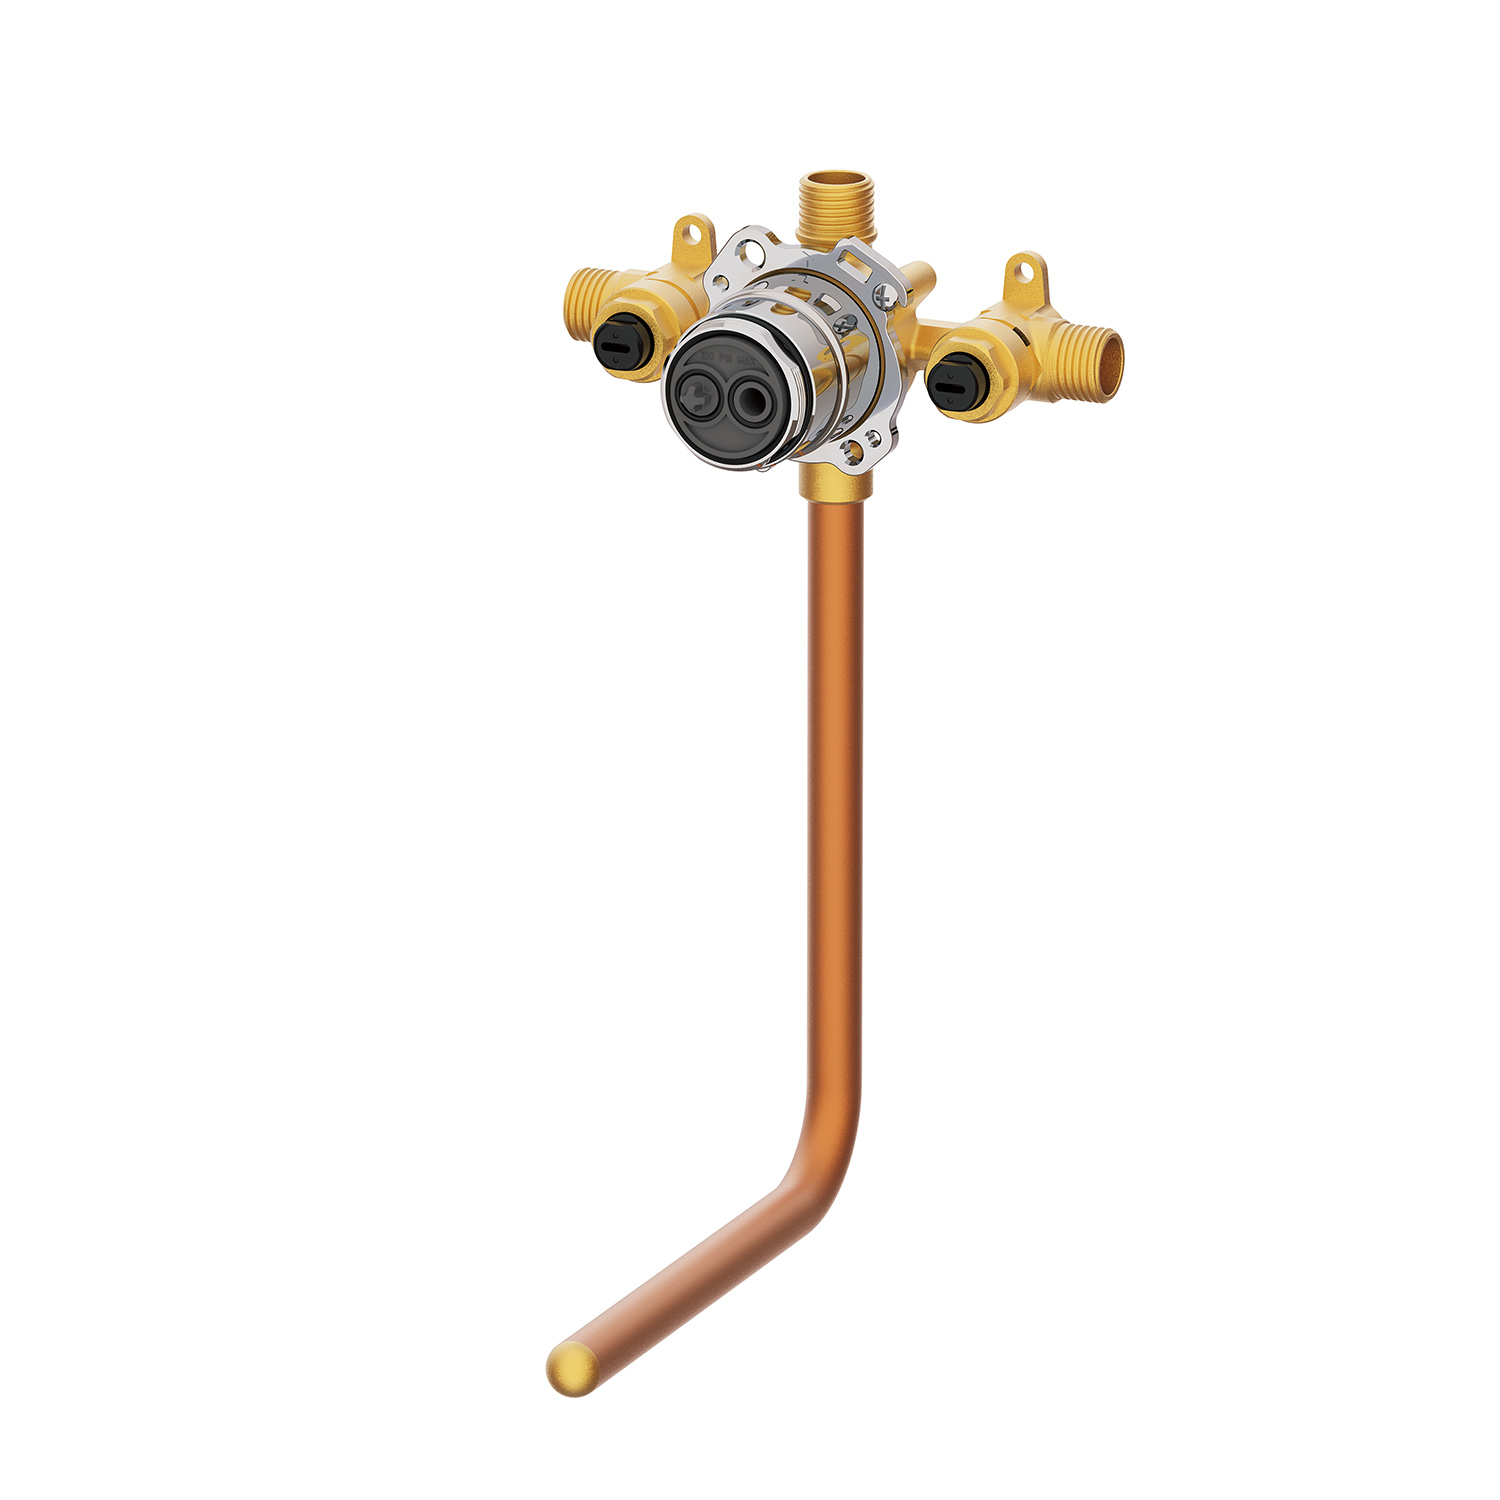 Danze G00GS505ST Treysta Tub & Shower Valve- Horizontal Inputs WITH Stops WITH Stub-out - IPS/Sweat